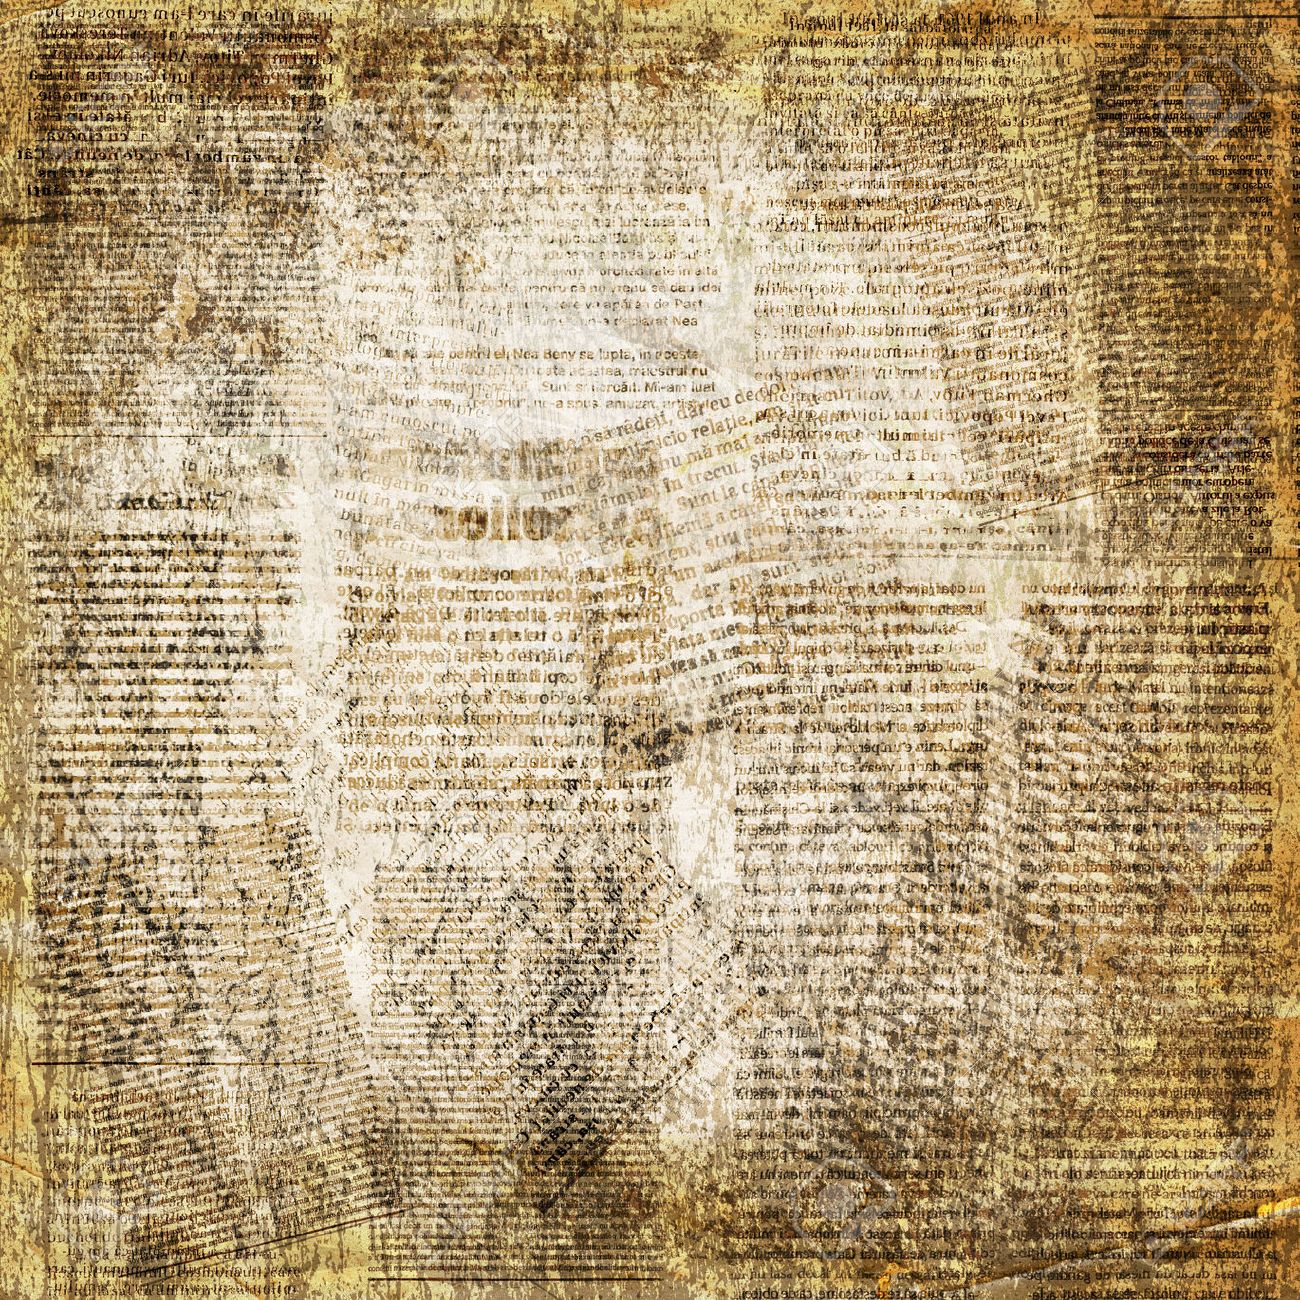 Grunge Abstract Newspaper Background For Design With Old Torn